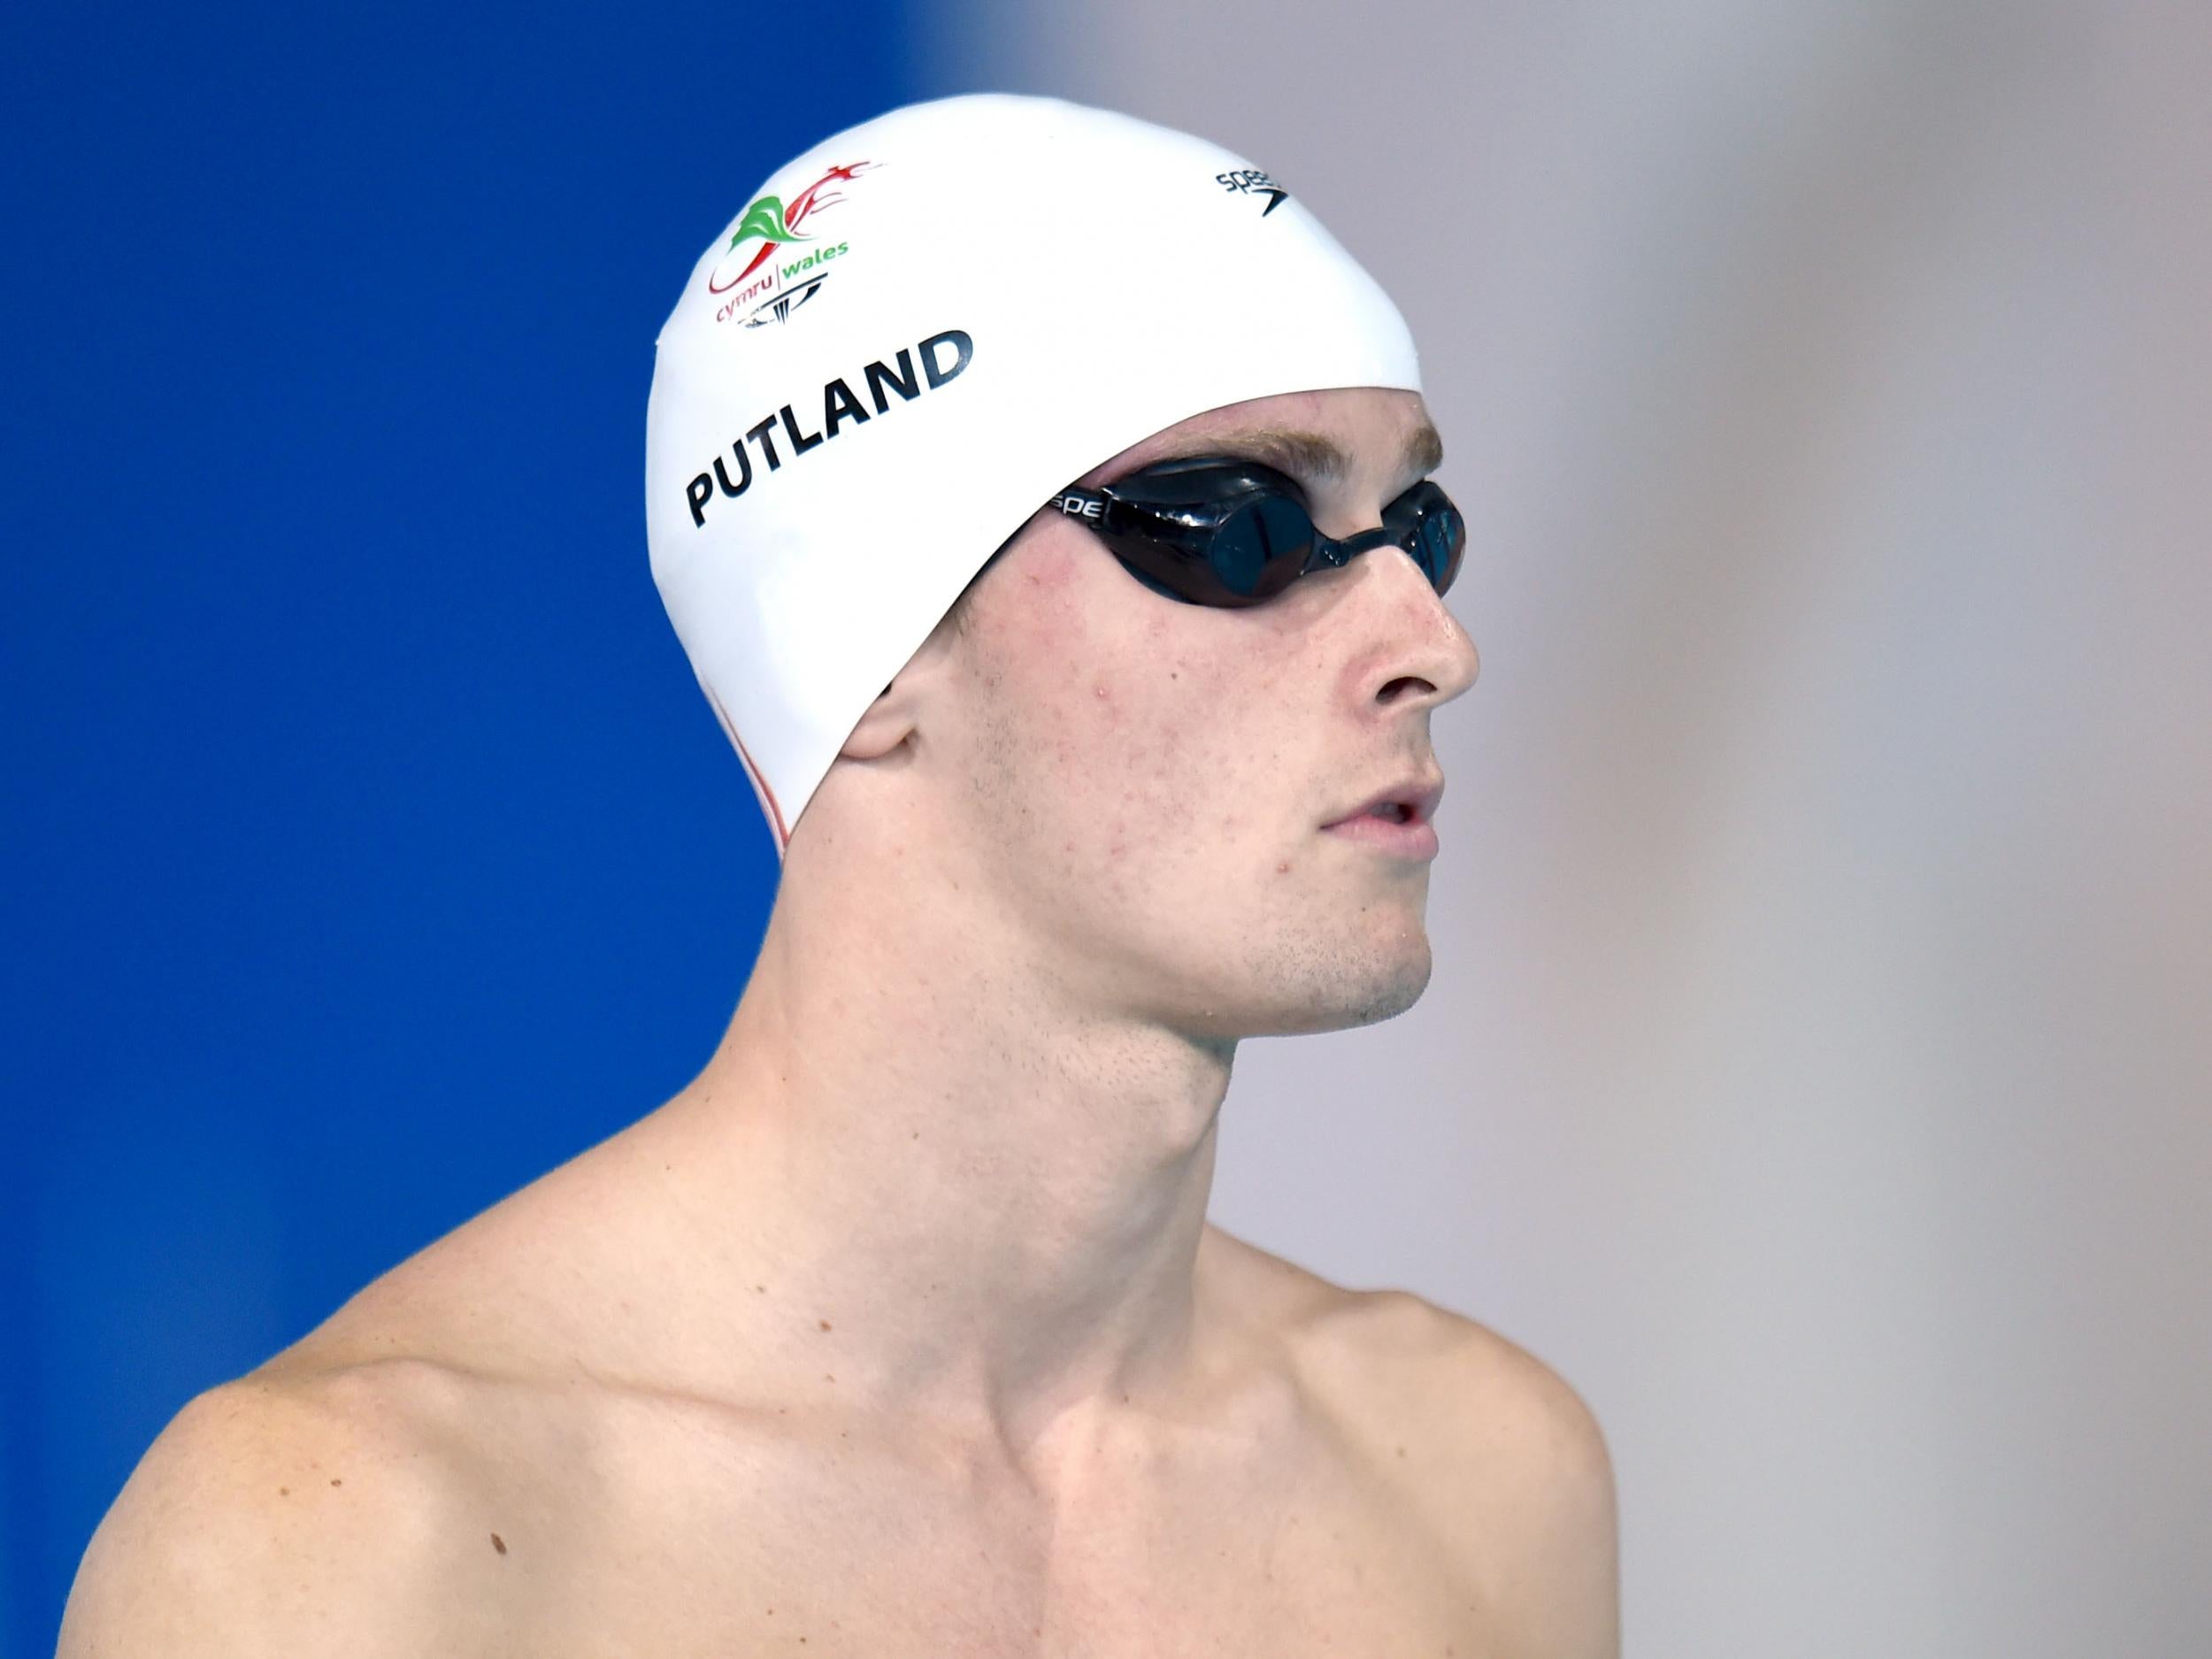 Otto Putland, who represented Wales at the 2014 Commonwealth Games in Glasgow, denies rape